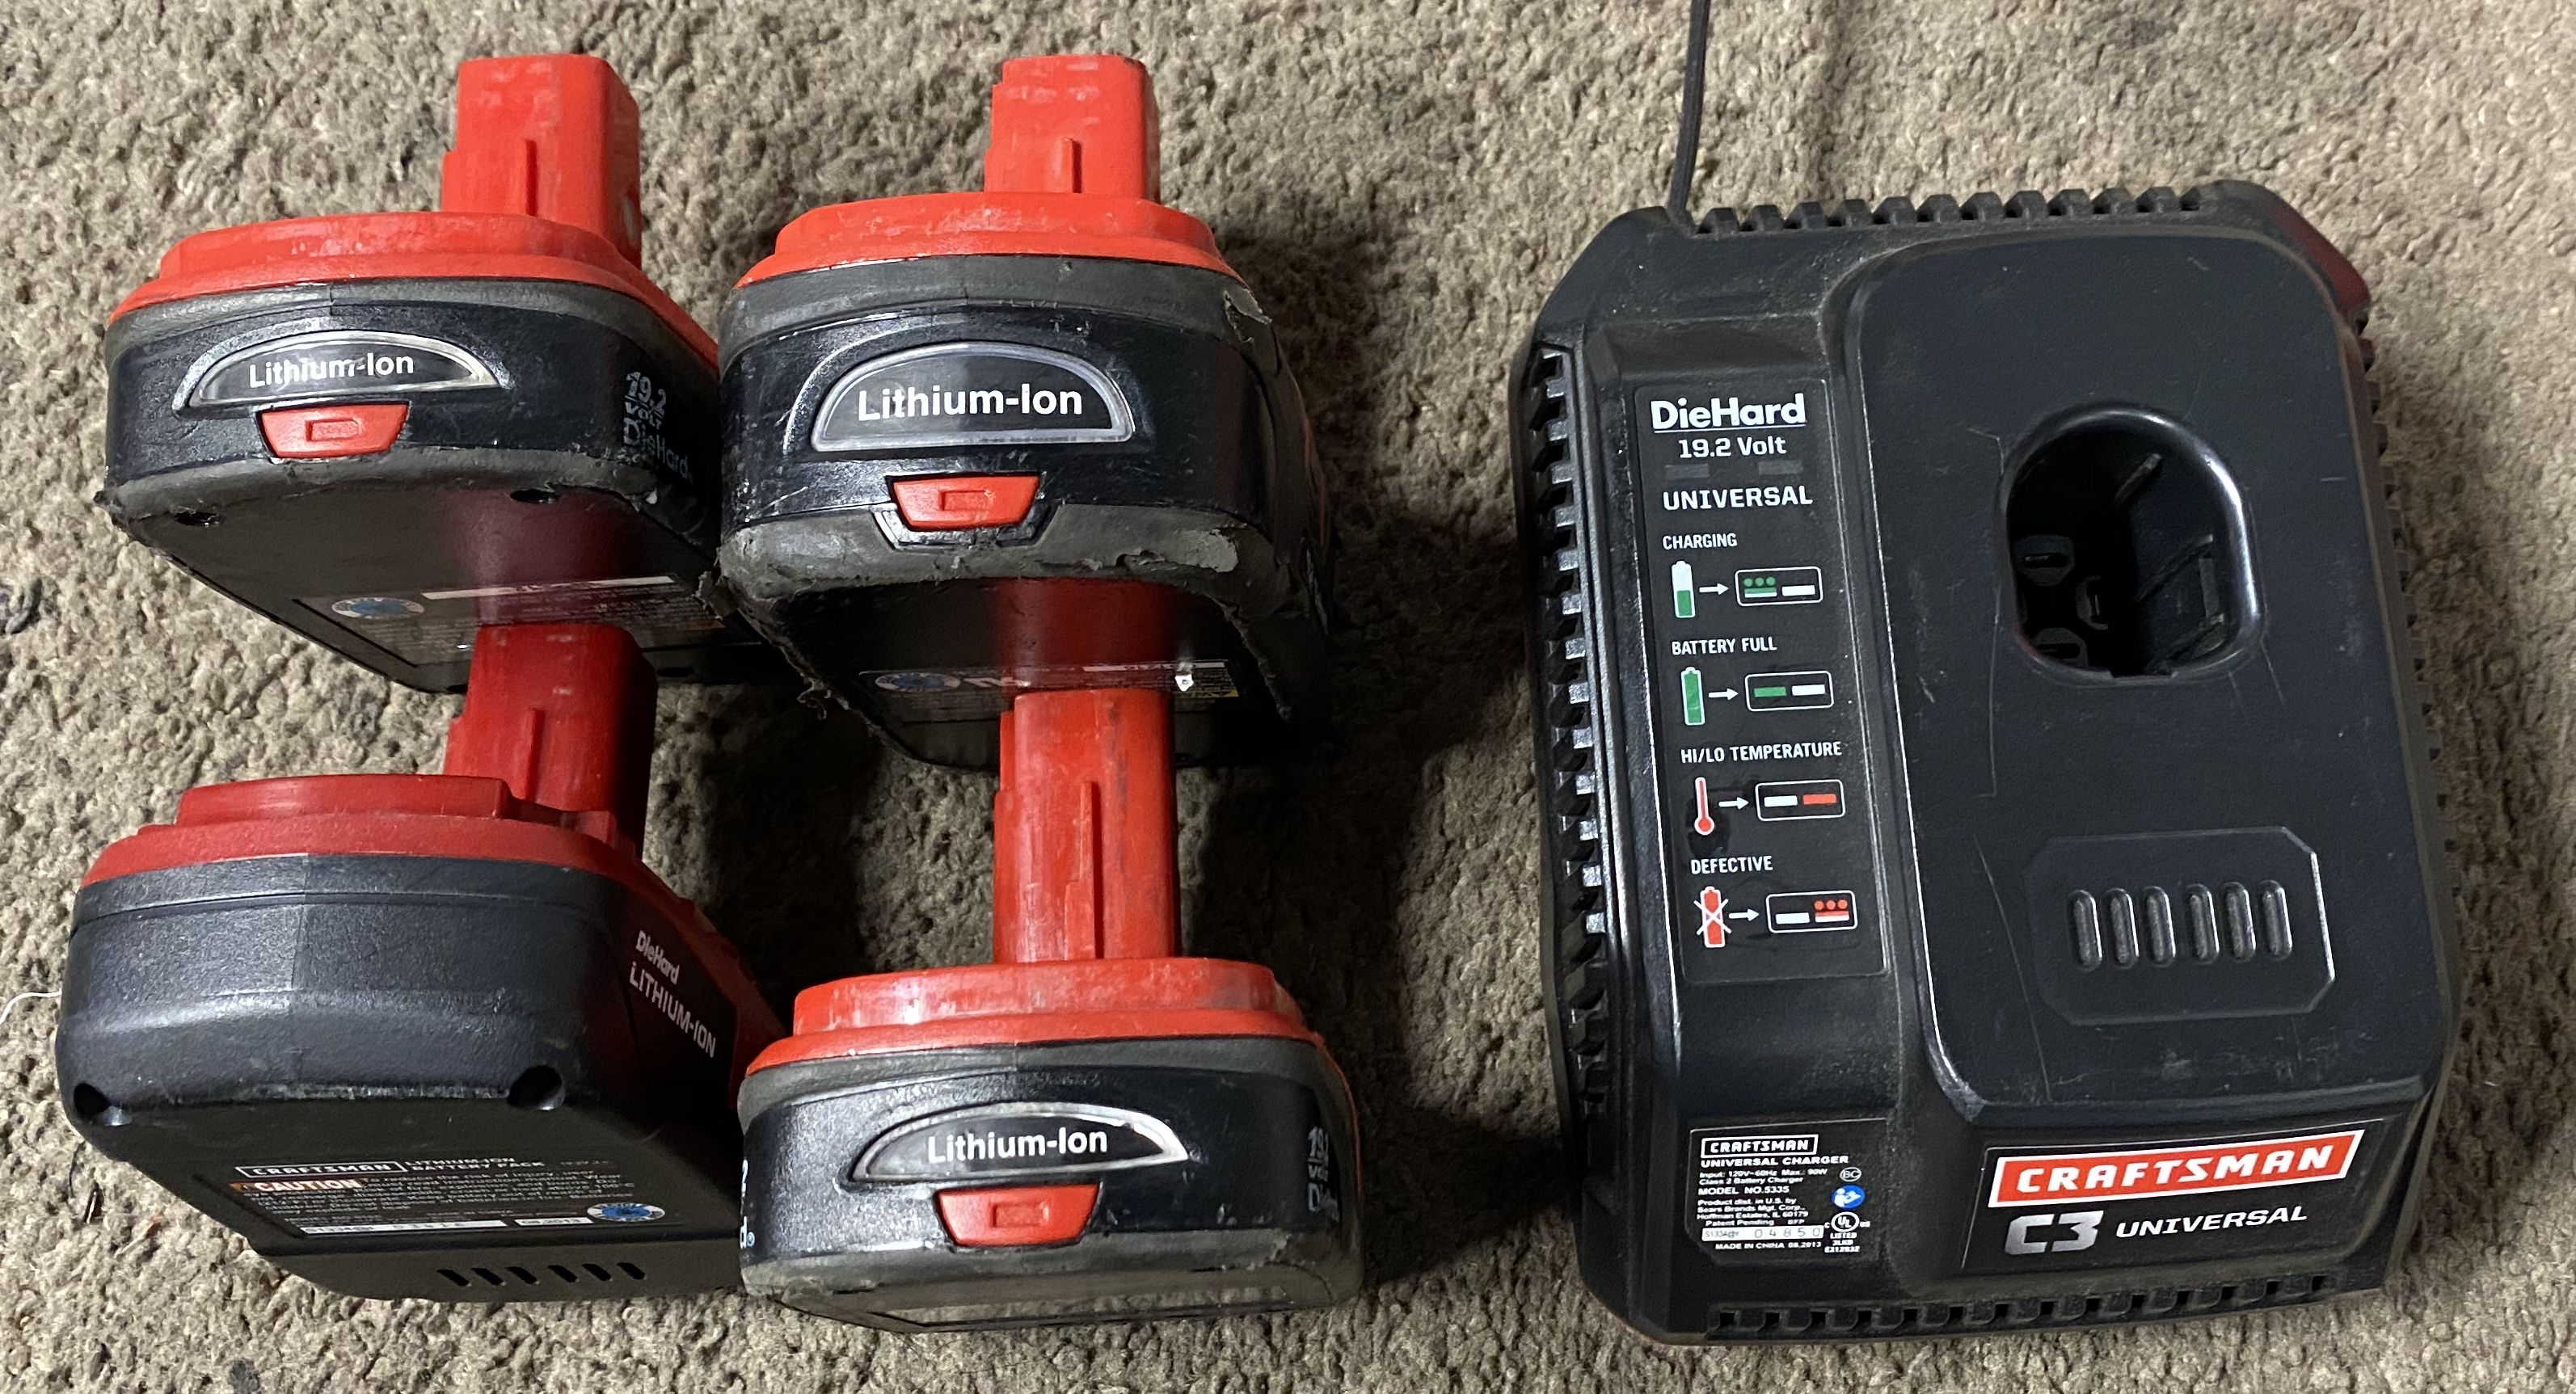 *** Craftsman c3 19.2v lithium ion batteries with charger ***